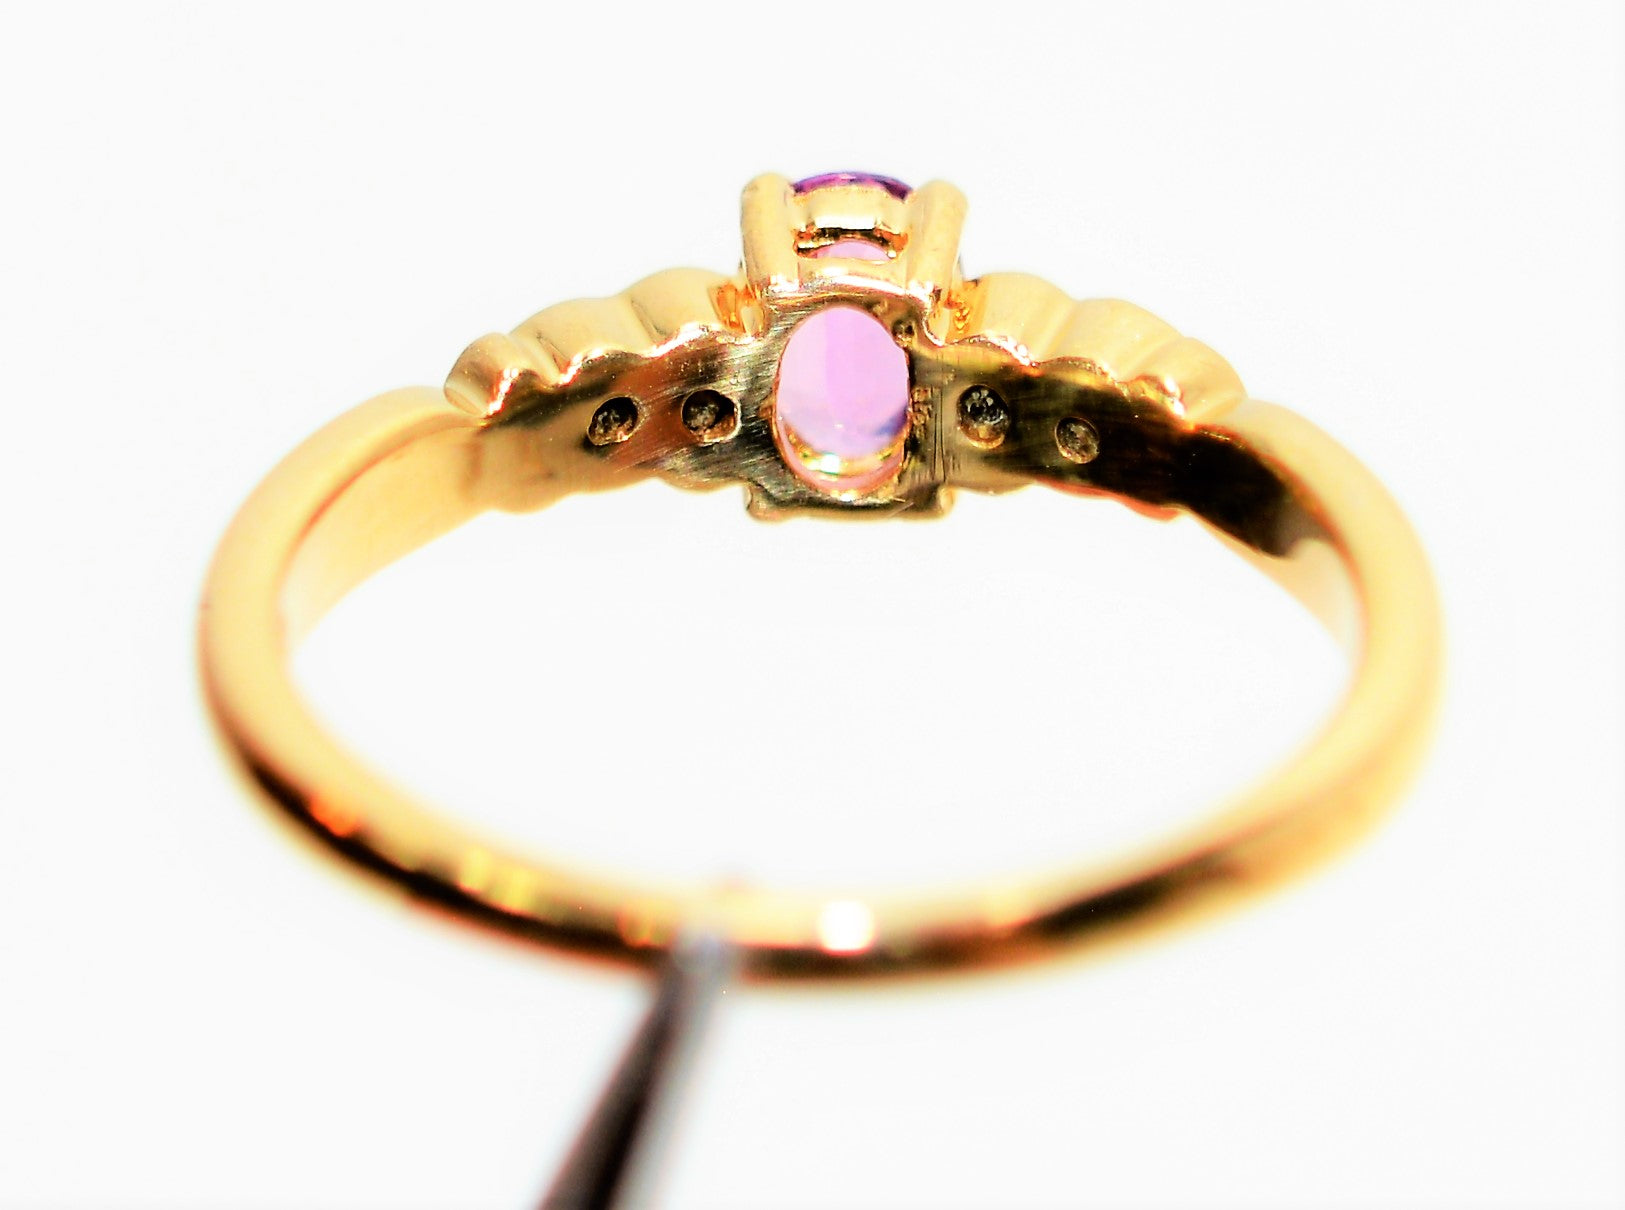 Certified Natural Padparadscha Sapphire & Diamond Ring 14K Solid Gold .56tcw Gemstone Ring Statement Ring Engagement Ring Bridal Jewelry